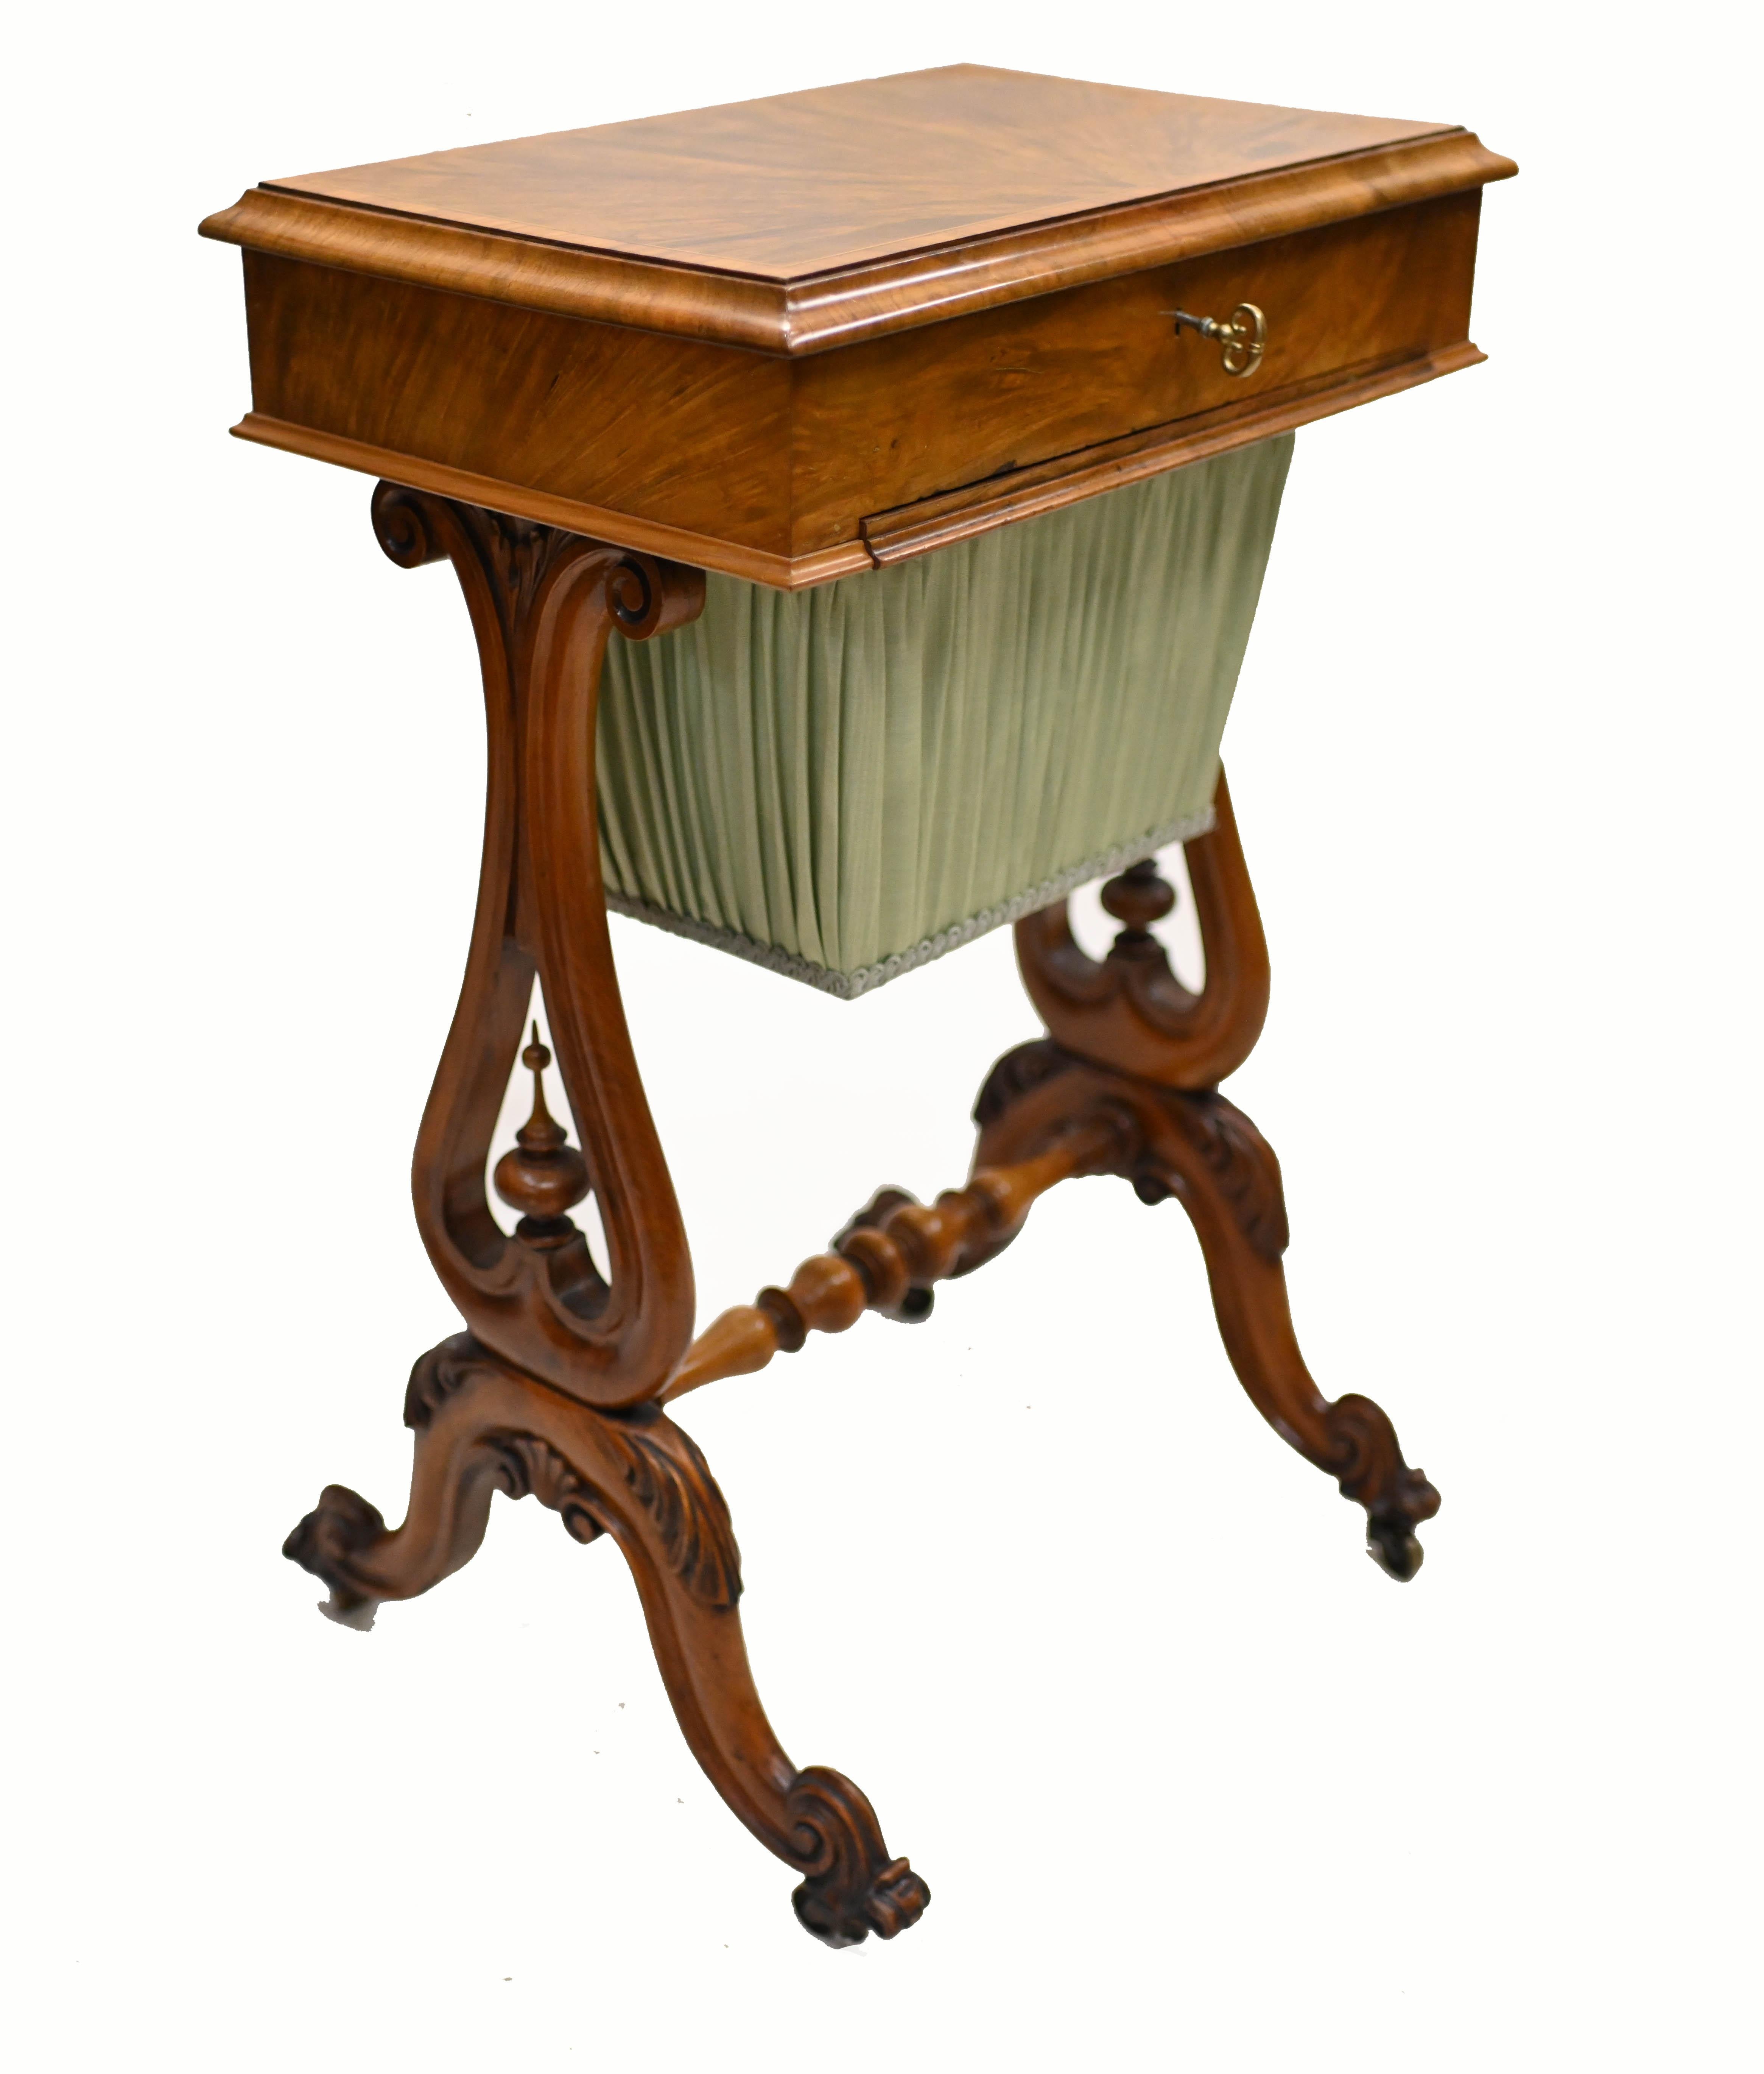 Elegant Victorian sewing table - or work box - in walnut
Great patina to the wood
Top opens out to reveal all the compartments and boxes
On lyre ends support by finely craved cabriole legs cost
Features a carved piecrust edging and tapering reeded